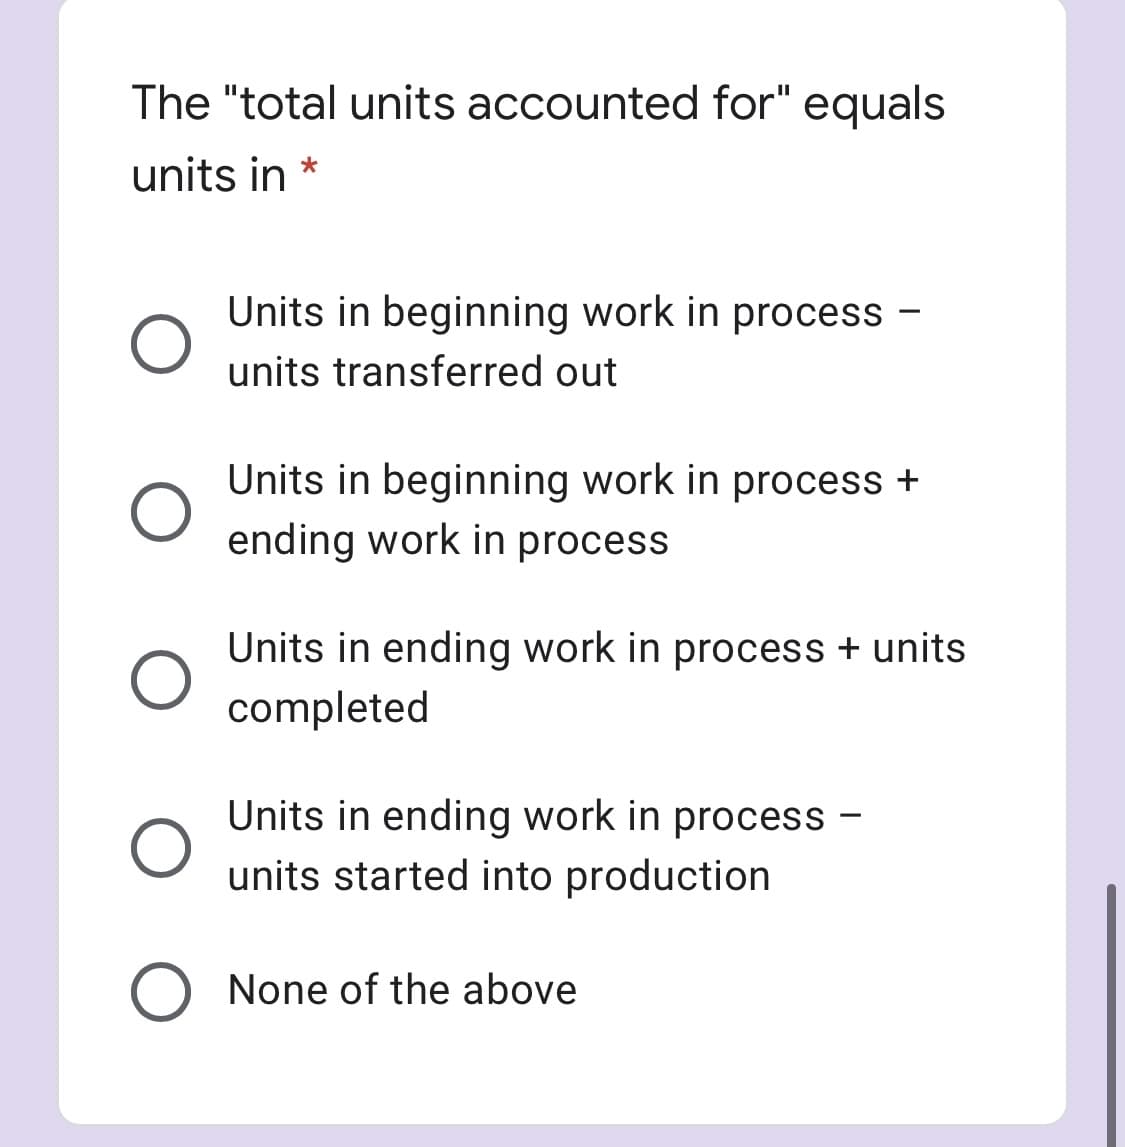 The "total units accounted for" equals
units in *
Units in beginning work in process -
units transferred out
Units in beginning work in process +
ending work in process
Units in ending work in process + units
completed
Units in ending work in process -
units started into production
None of the above
